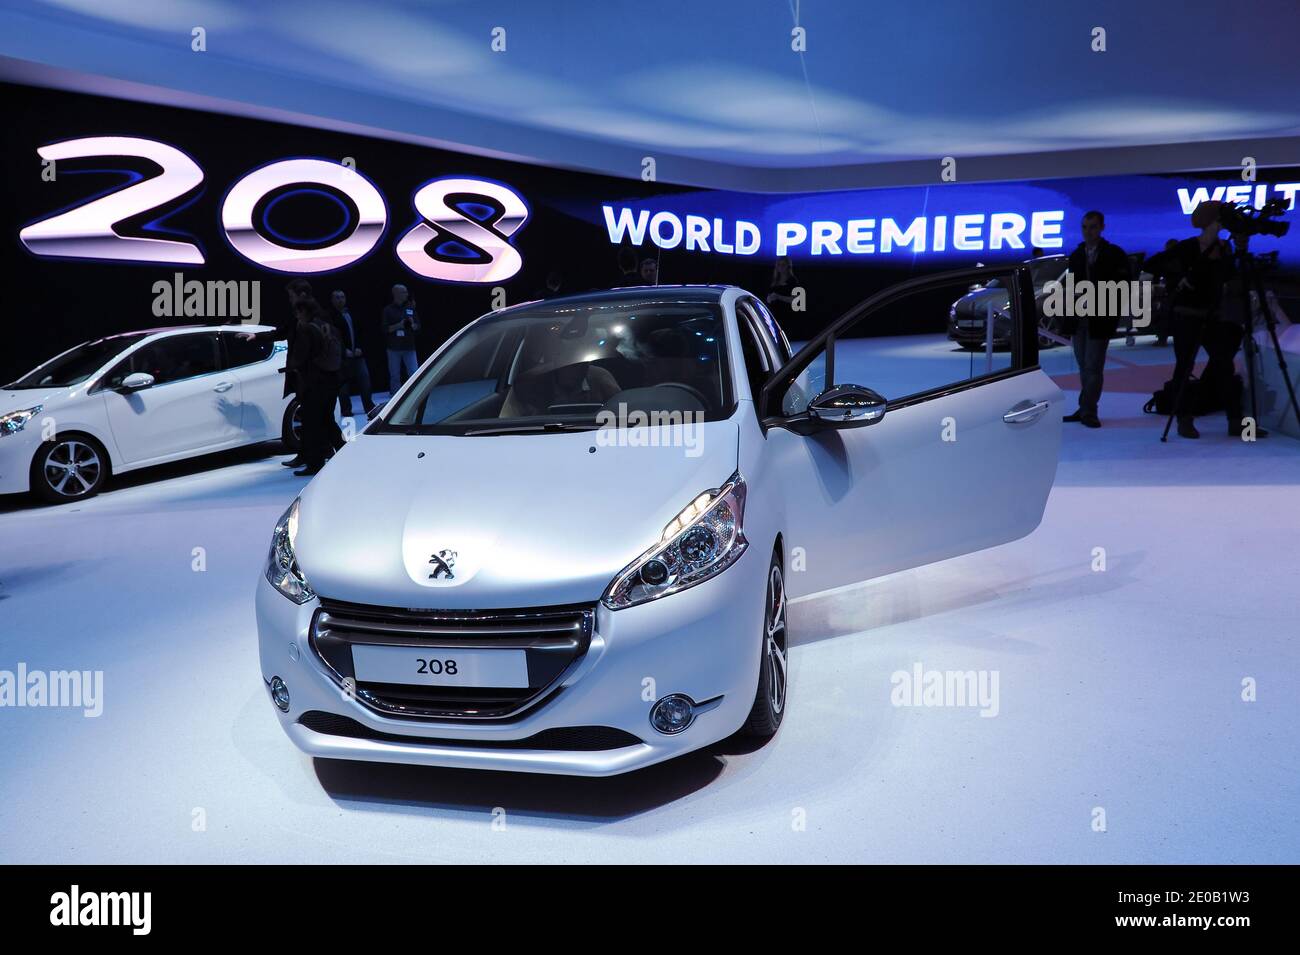 Peugeot 208 on display at the 82nd International Motor Show and Accessories  of Geneva, Switzerland on March 7, 2012. Photo by Loona/ABACAPRESS.COM  Stock Photo - Alamy